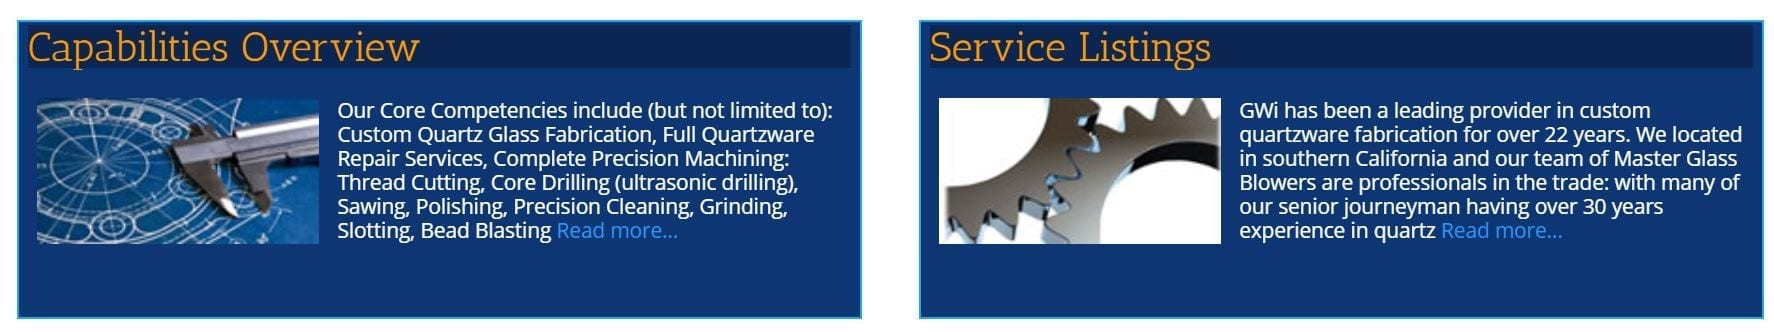 capabilities and service listing